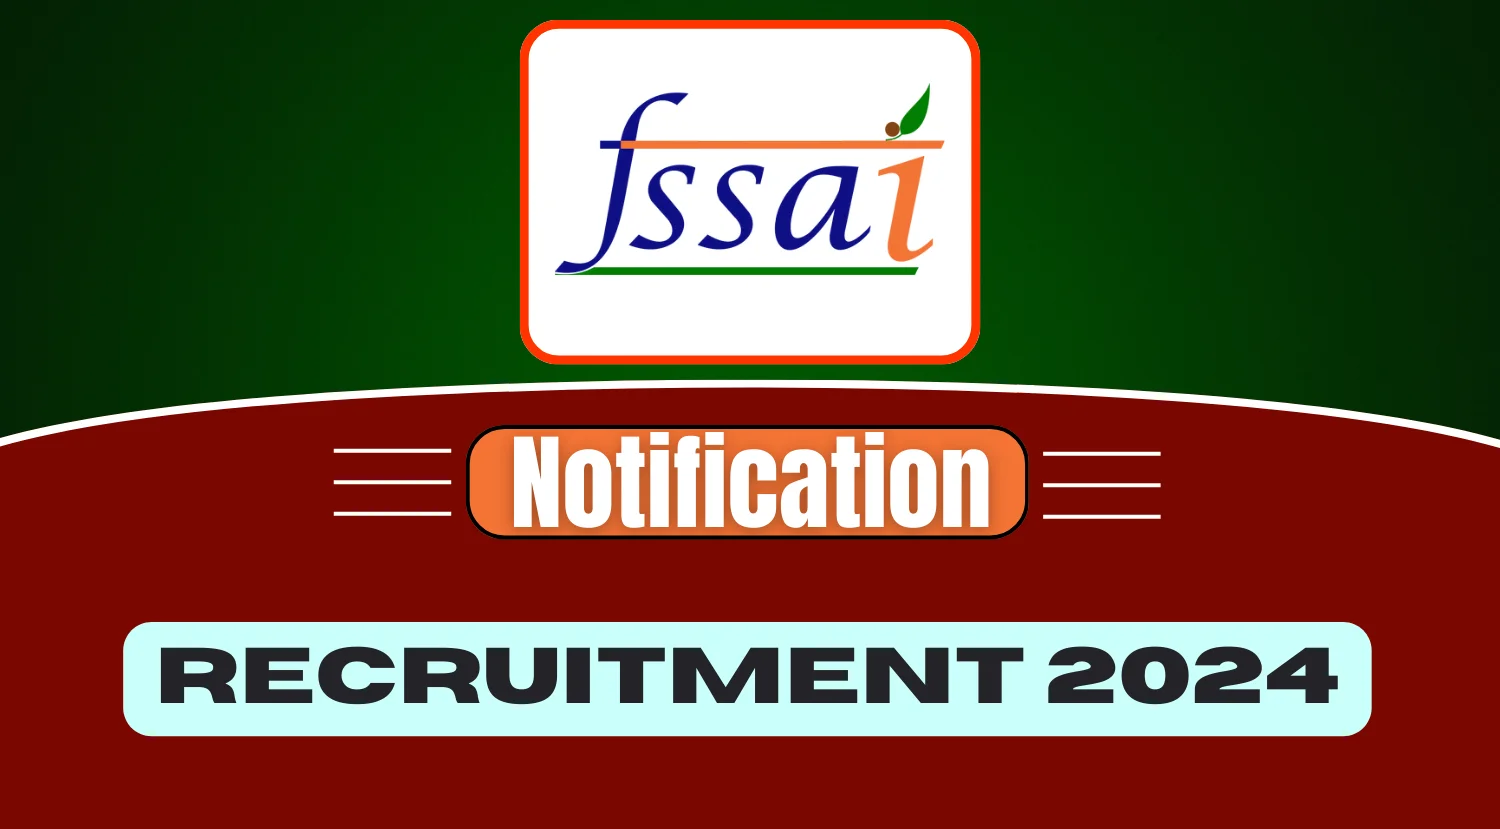 FSSAI Recruitment 2024 Notification Out, Apply Now for Various Assistant and Administrative Positions